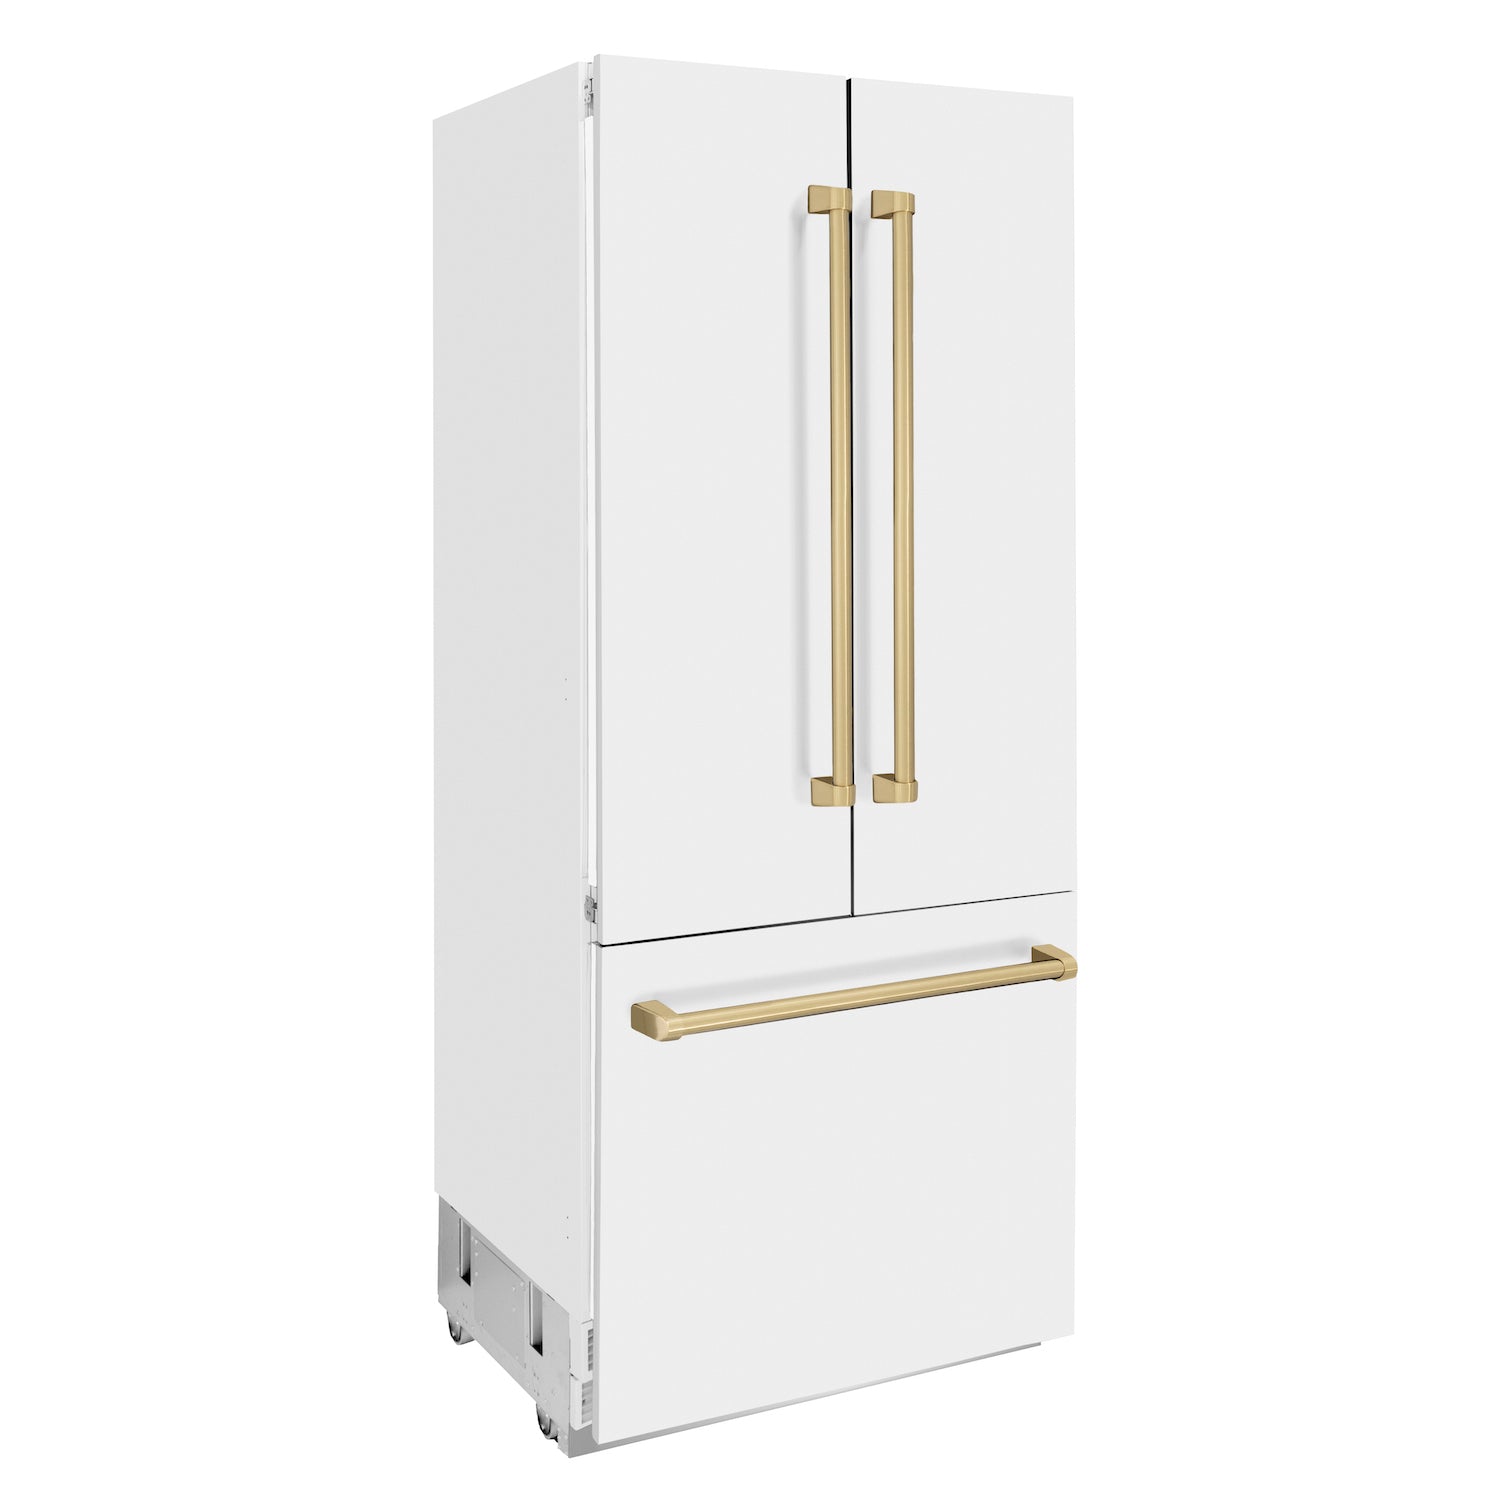 ZLINE Autograph Edition 36 in. Built-in Refrigerator in White Matte with Champagne Bronze Accents (RBIVZ-WM-36-CB) side, doors closed